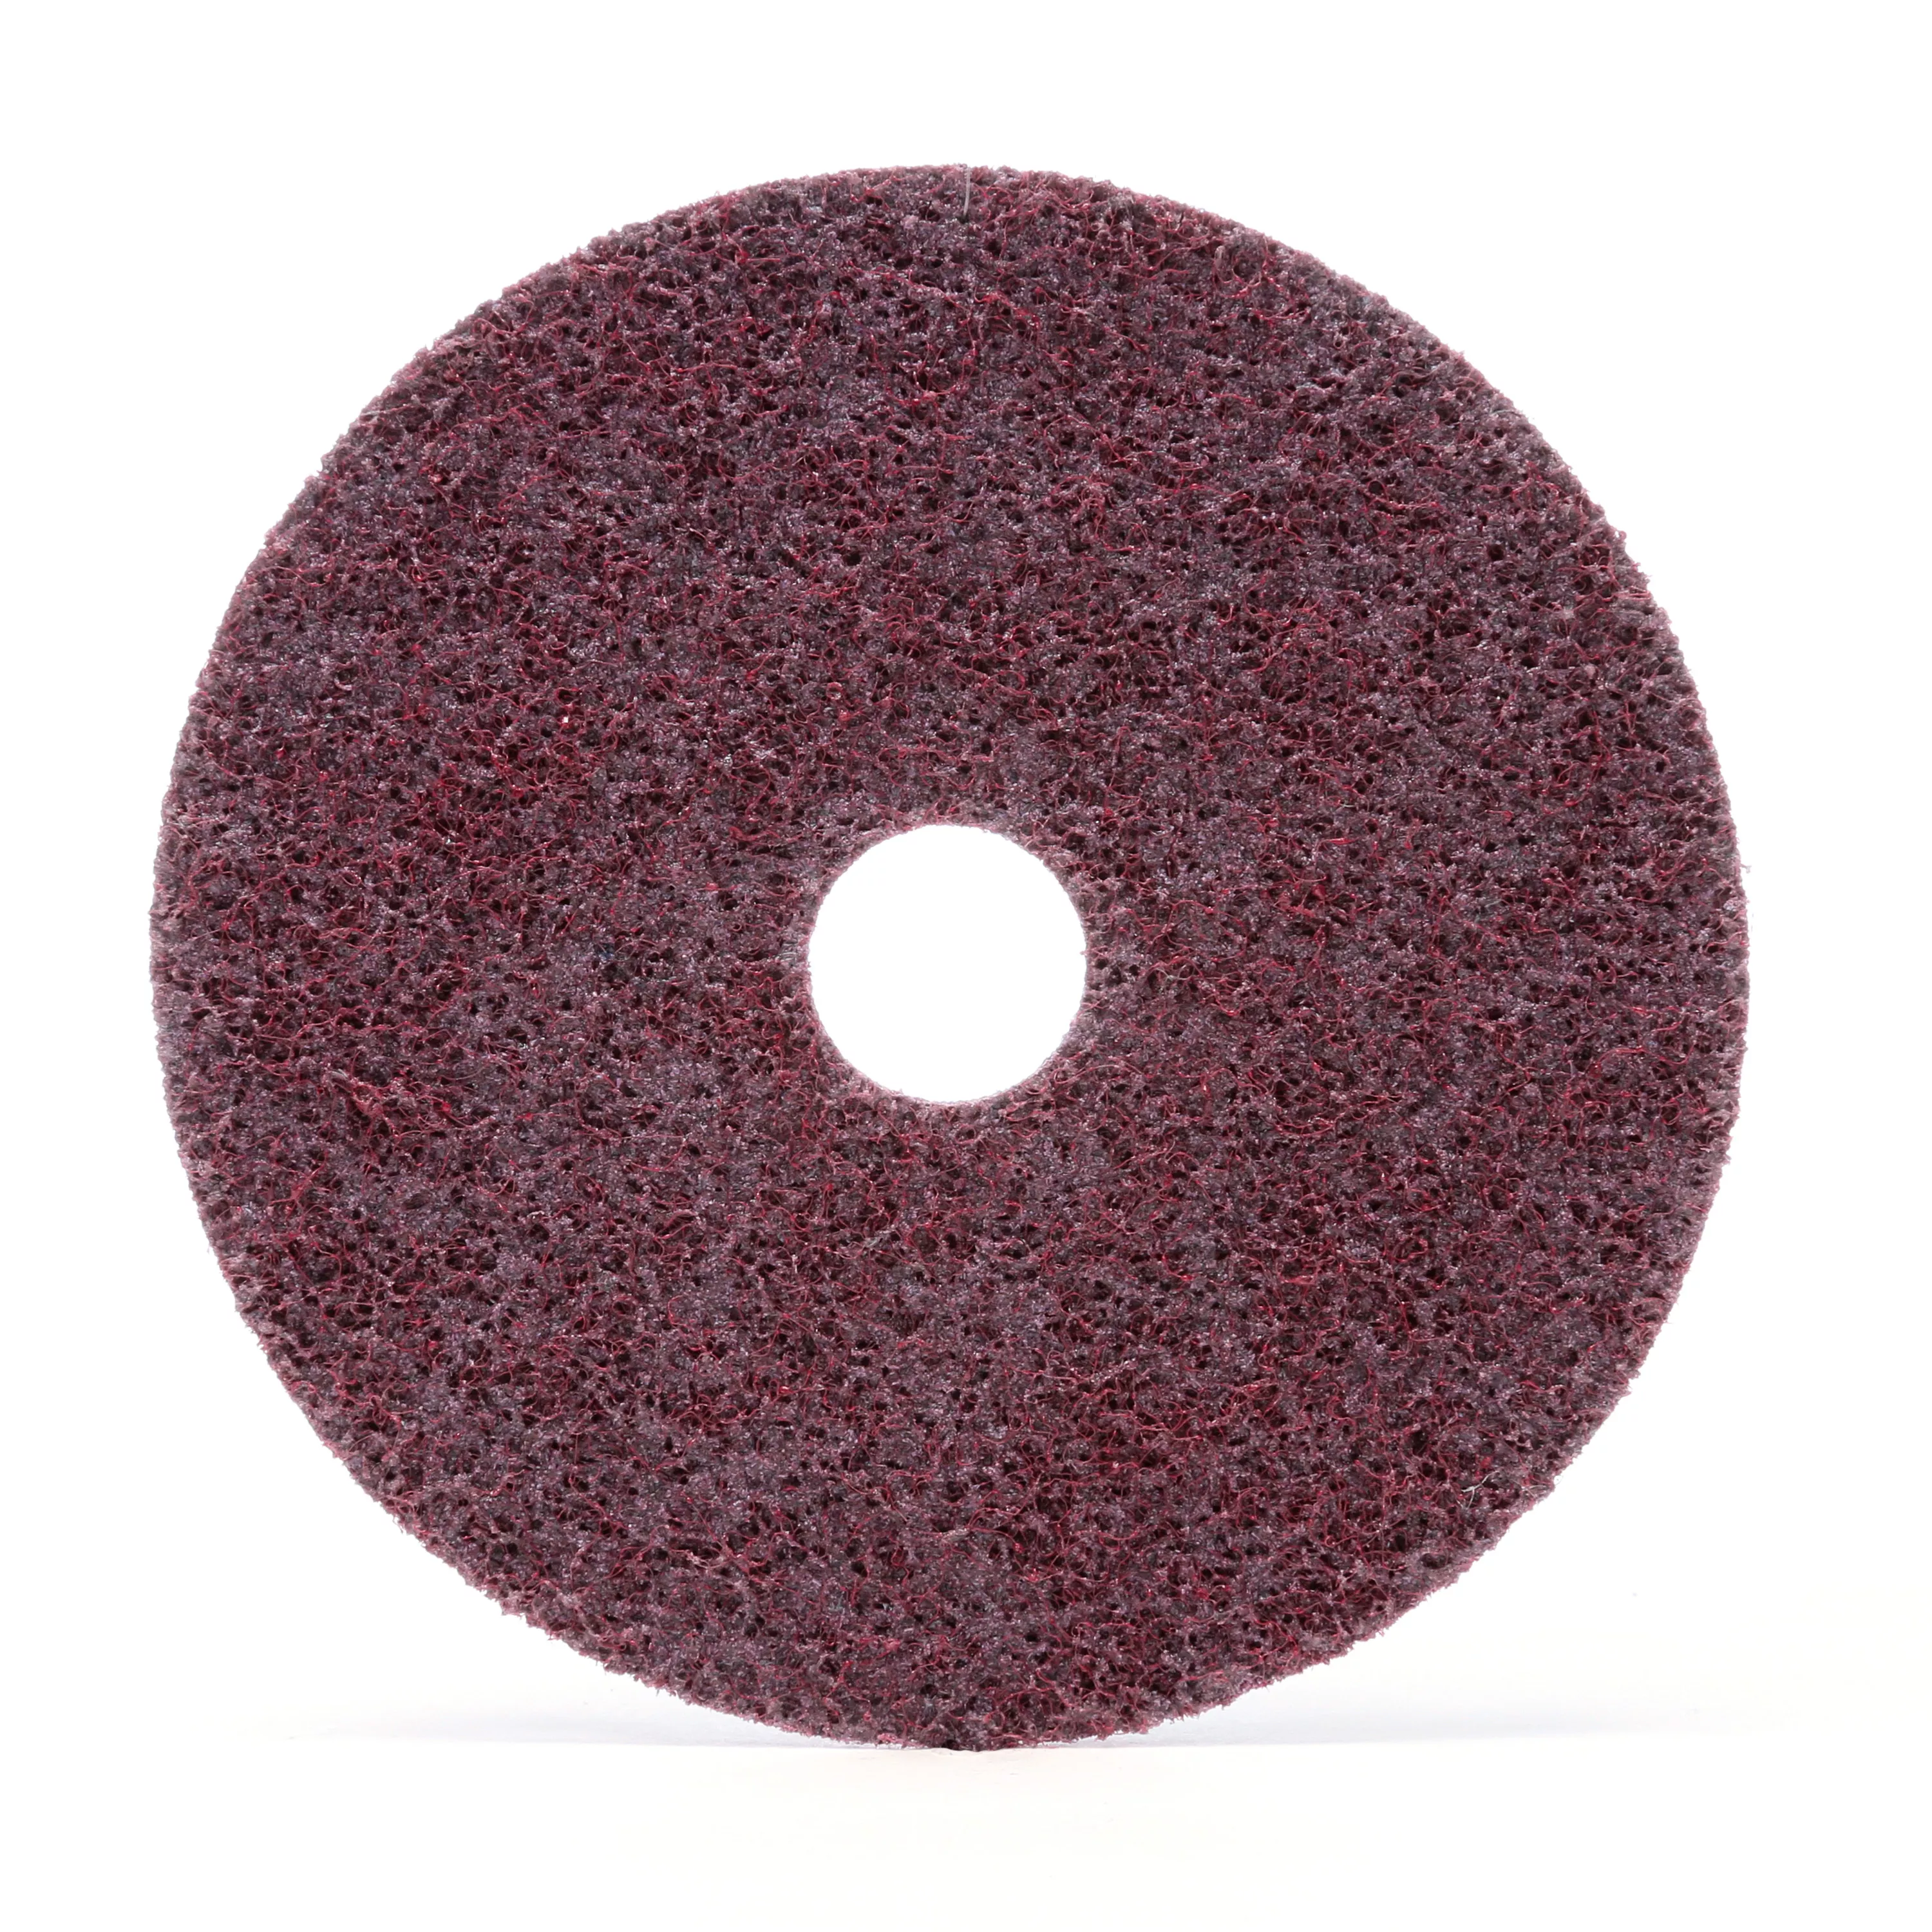 Product Number GB-DH | Scotch-Brite™ Light Grinding and Blending Disc